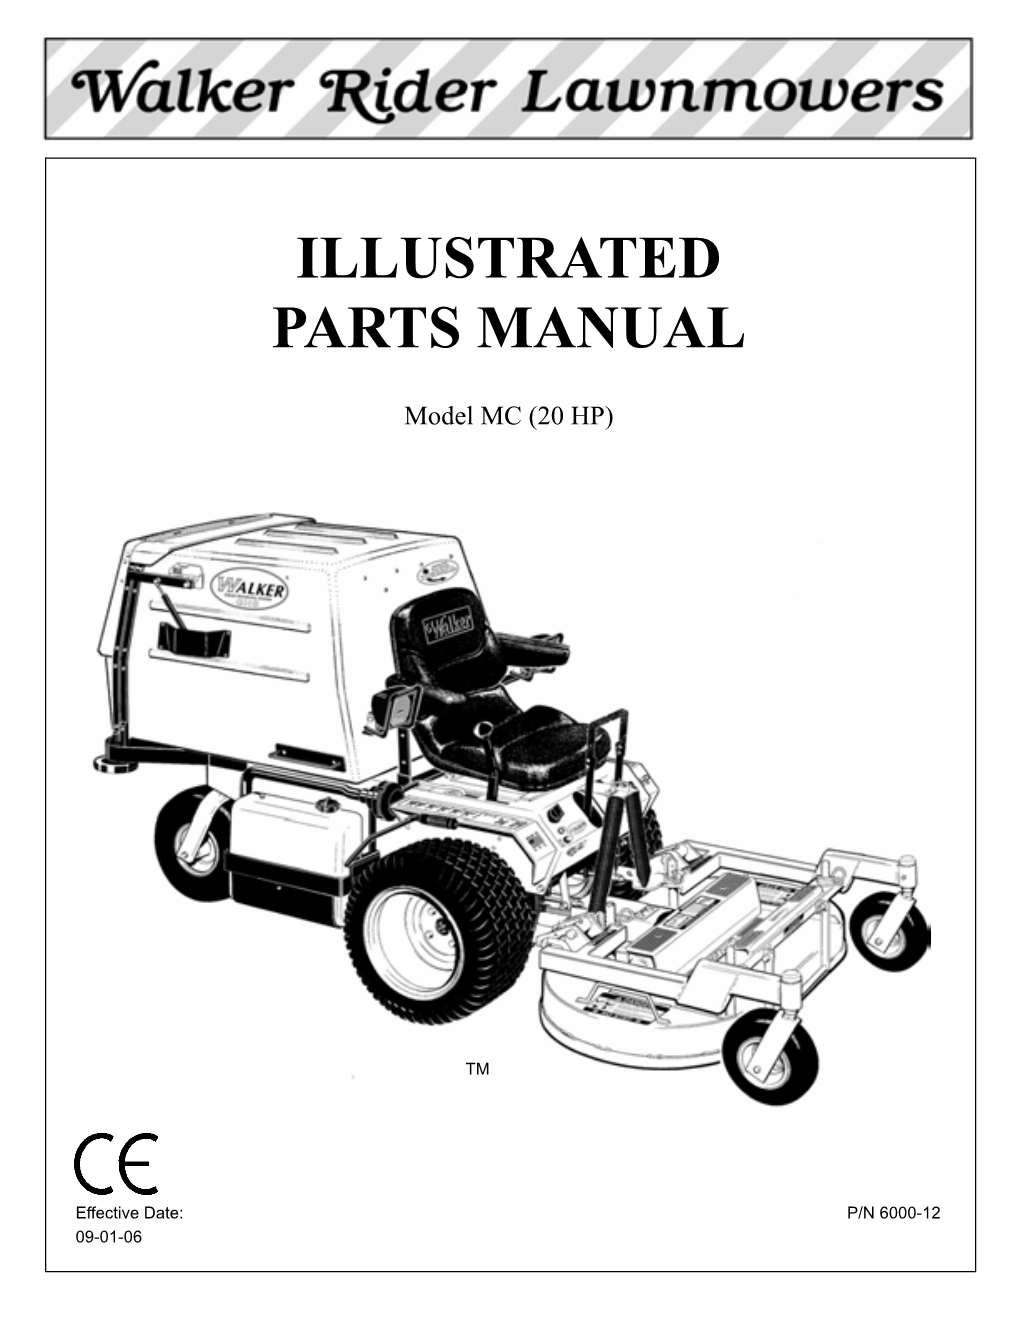 Illustrated Parts Manual